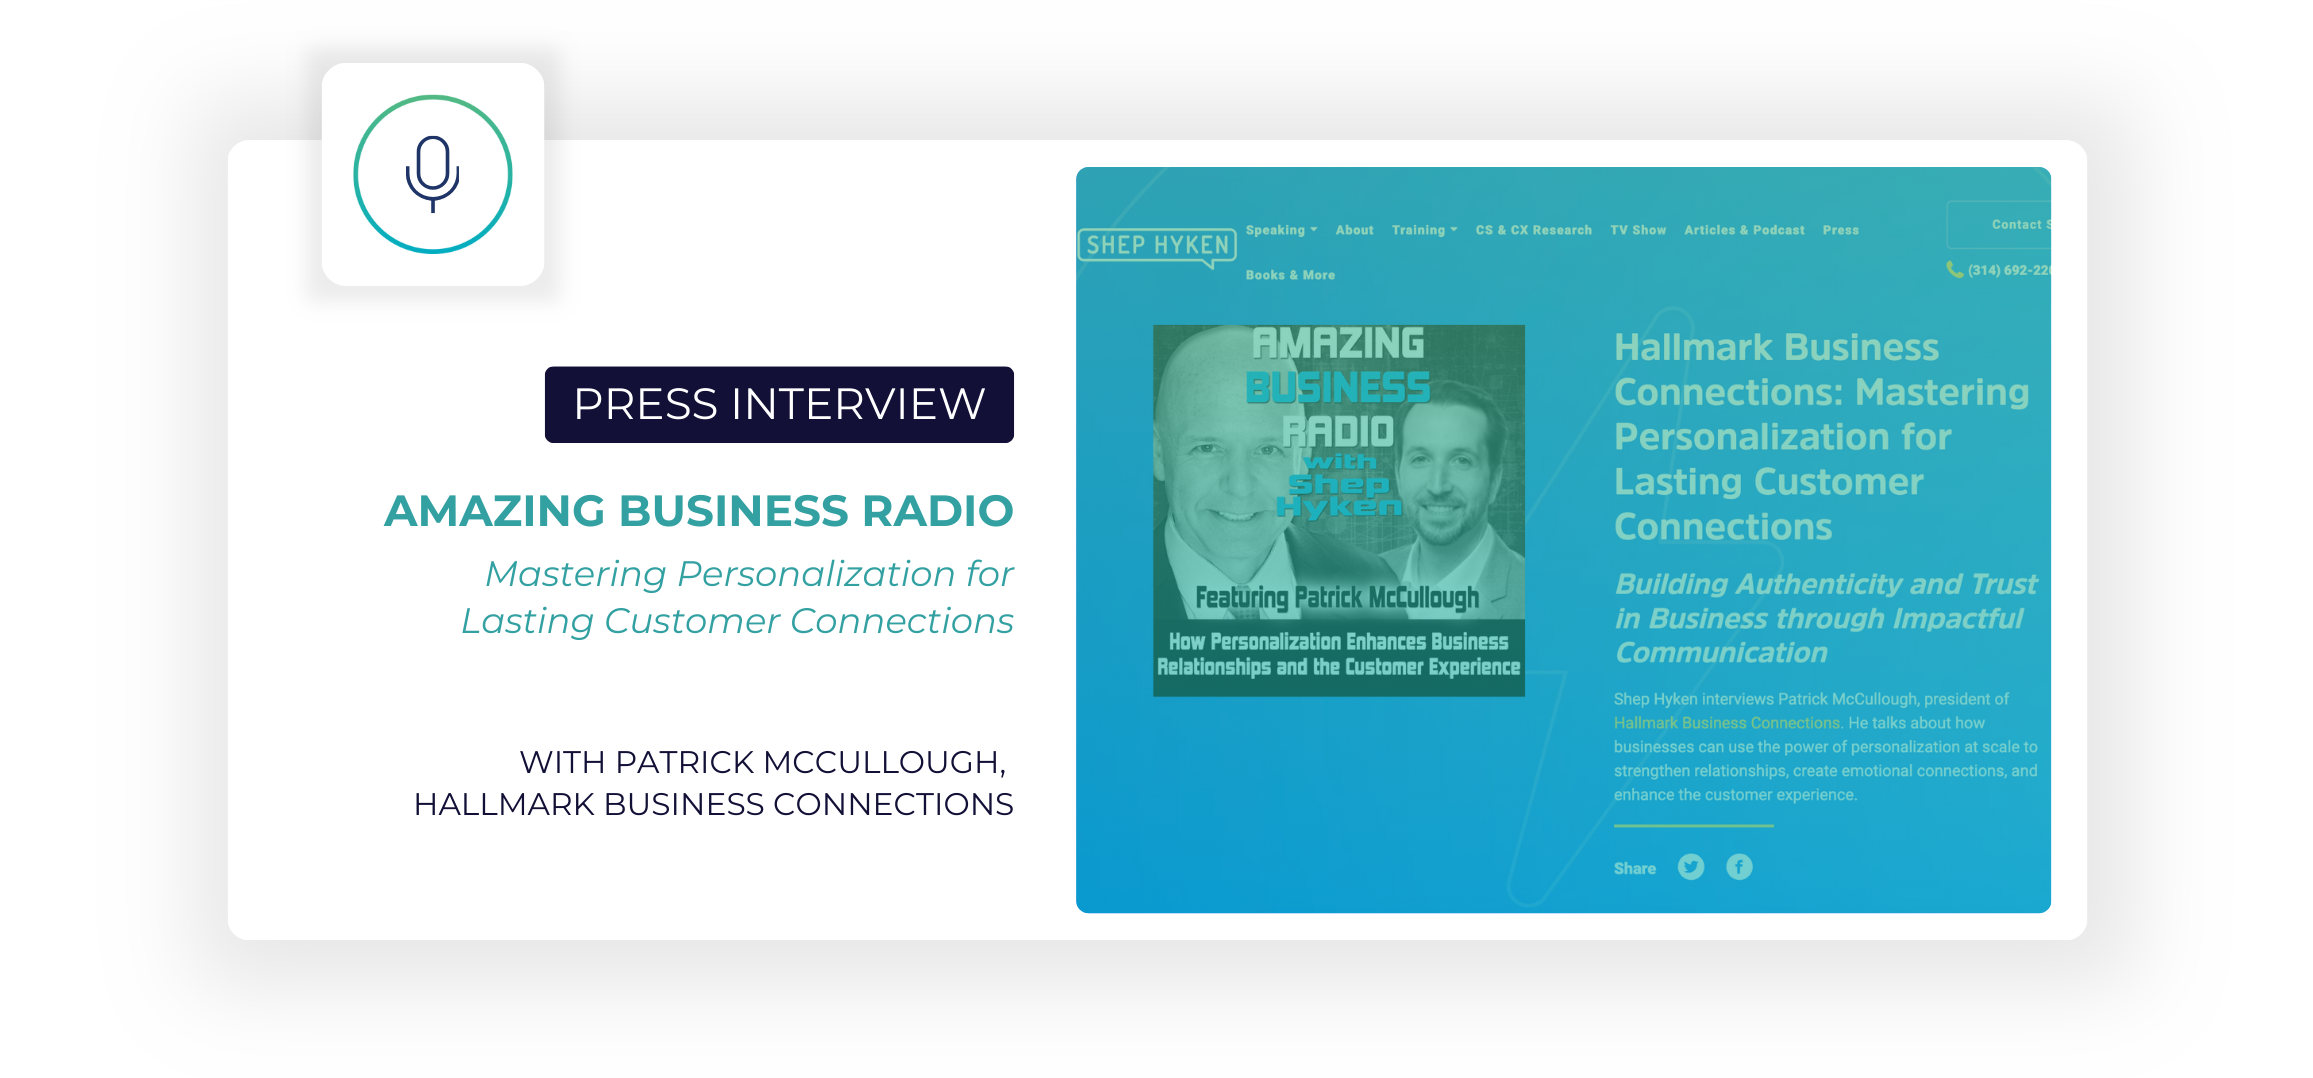 Press interview with Patrick McCullough on Amazing Business Radio: Hallmark Business Connections: Mastering Personalization for Lasting Customer Connections